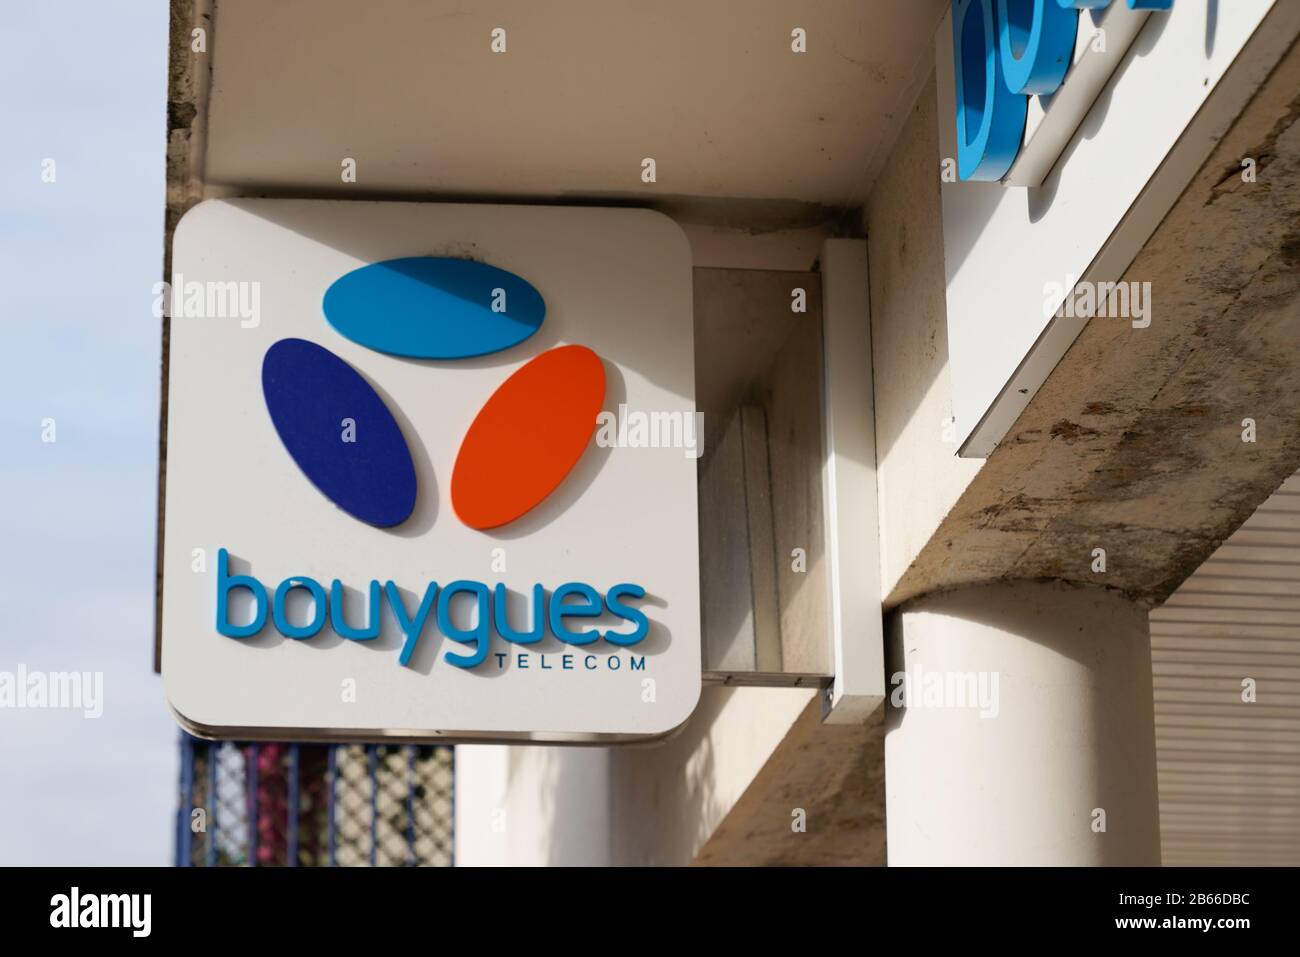 Bordeaux , Aquitaine / France - 01 09 2020 : Bouygues telecom shop sign logo phone operator store in city Stock Photo